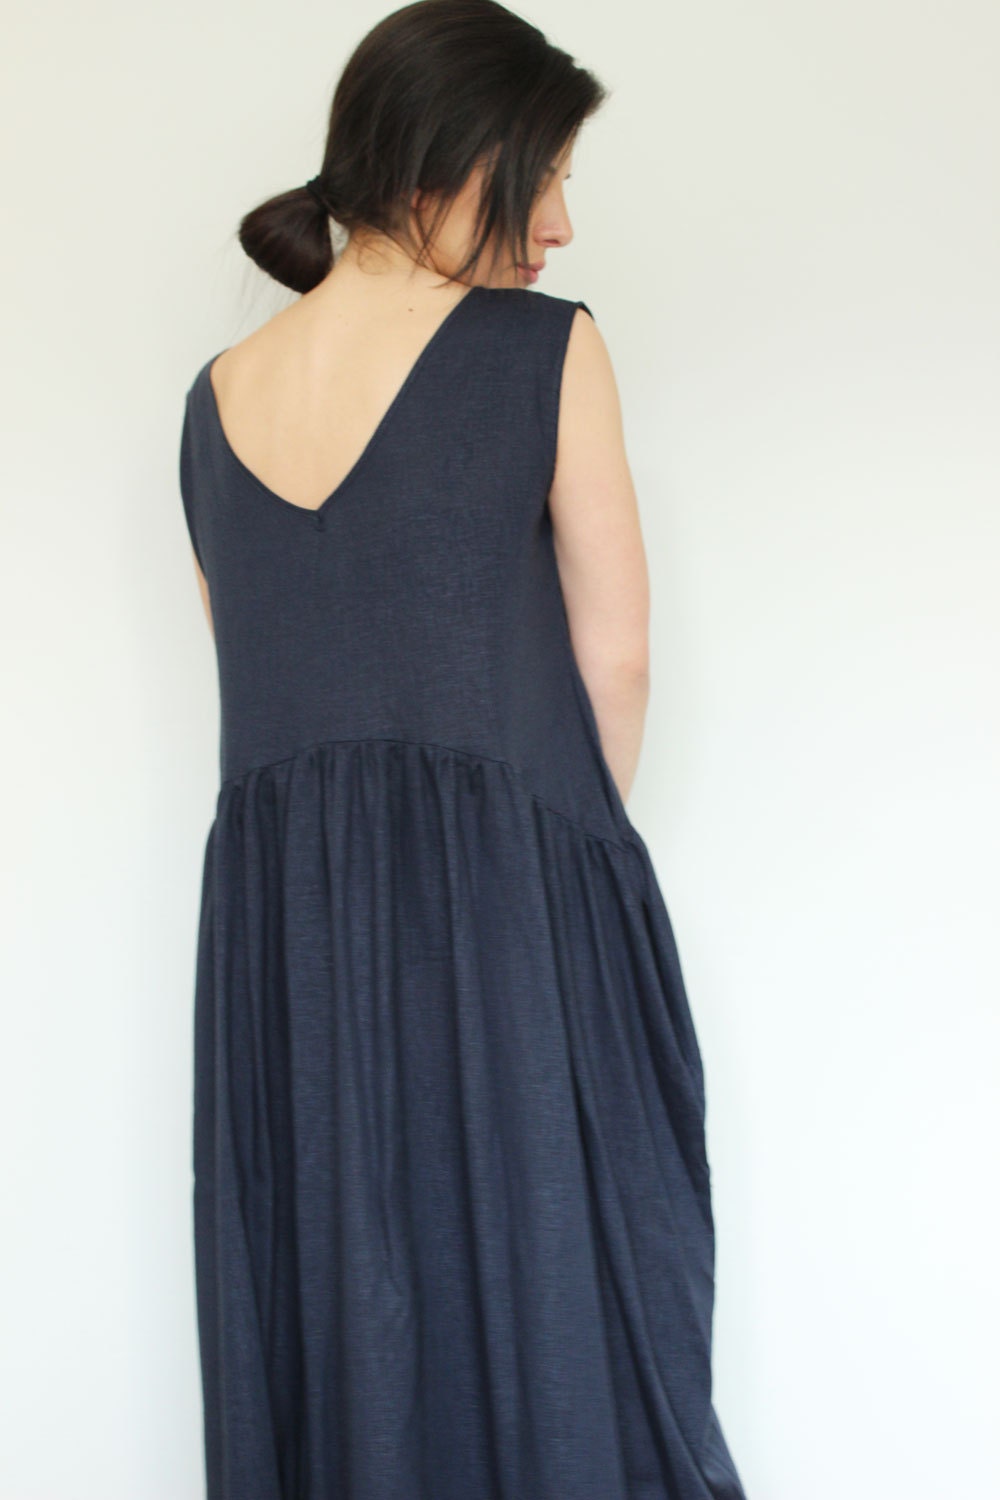 Linen Dress Blue Linen Dress Summer linen dress by linenOnlyDesign